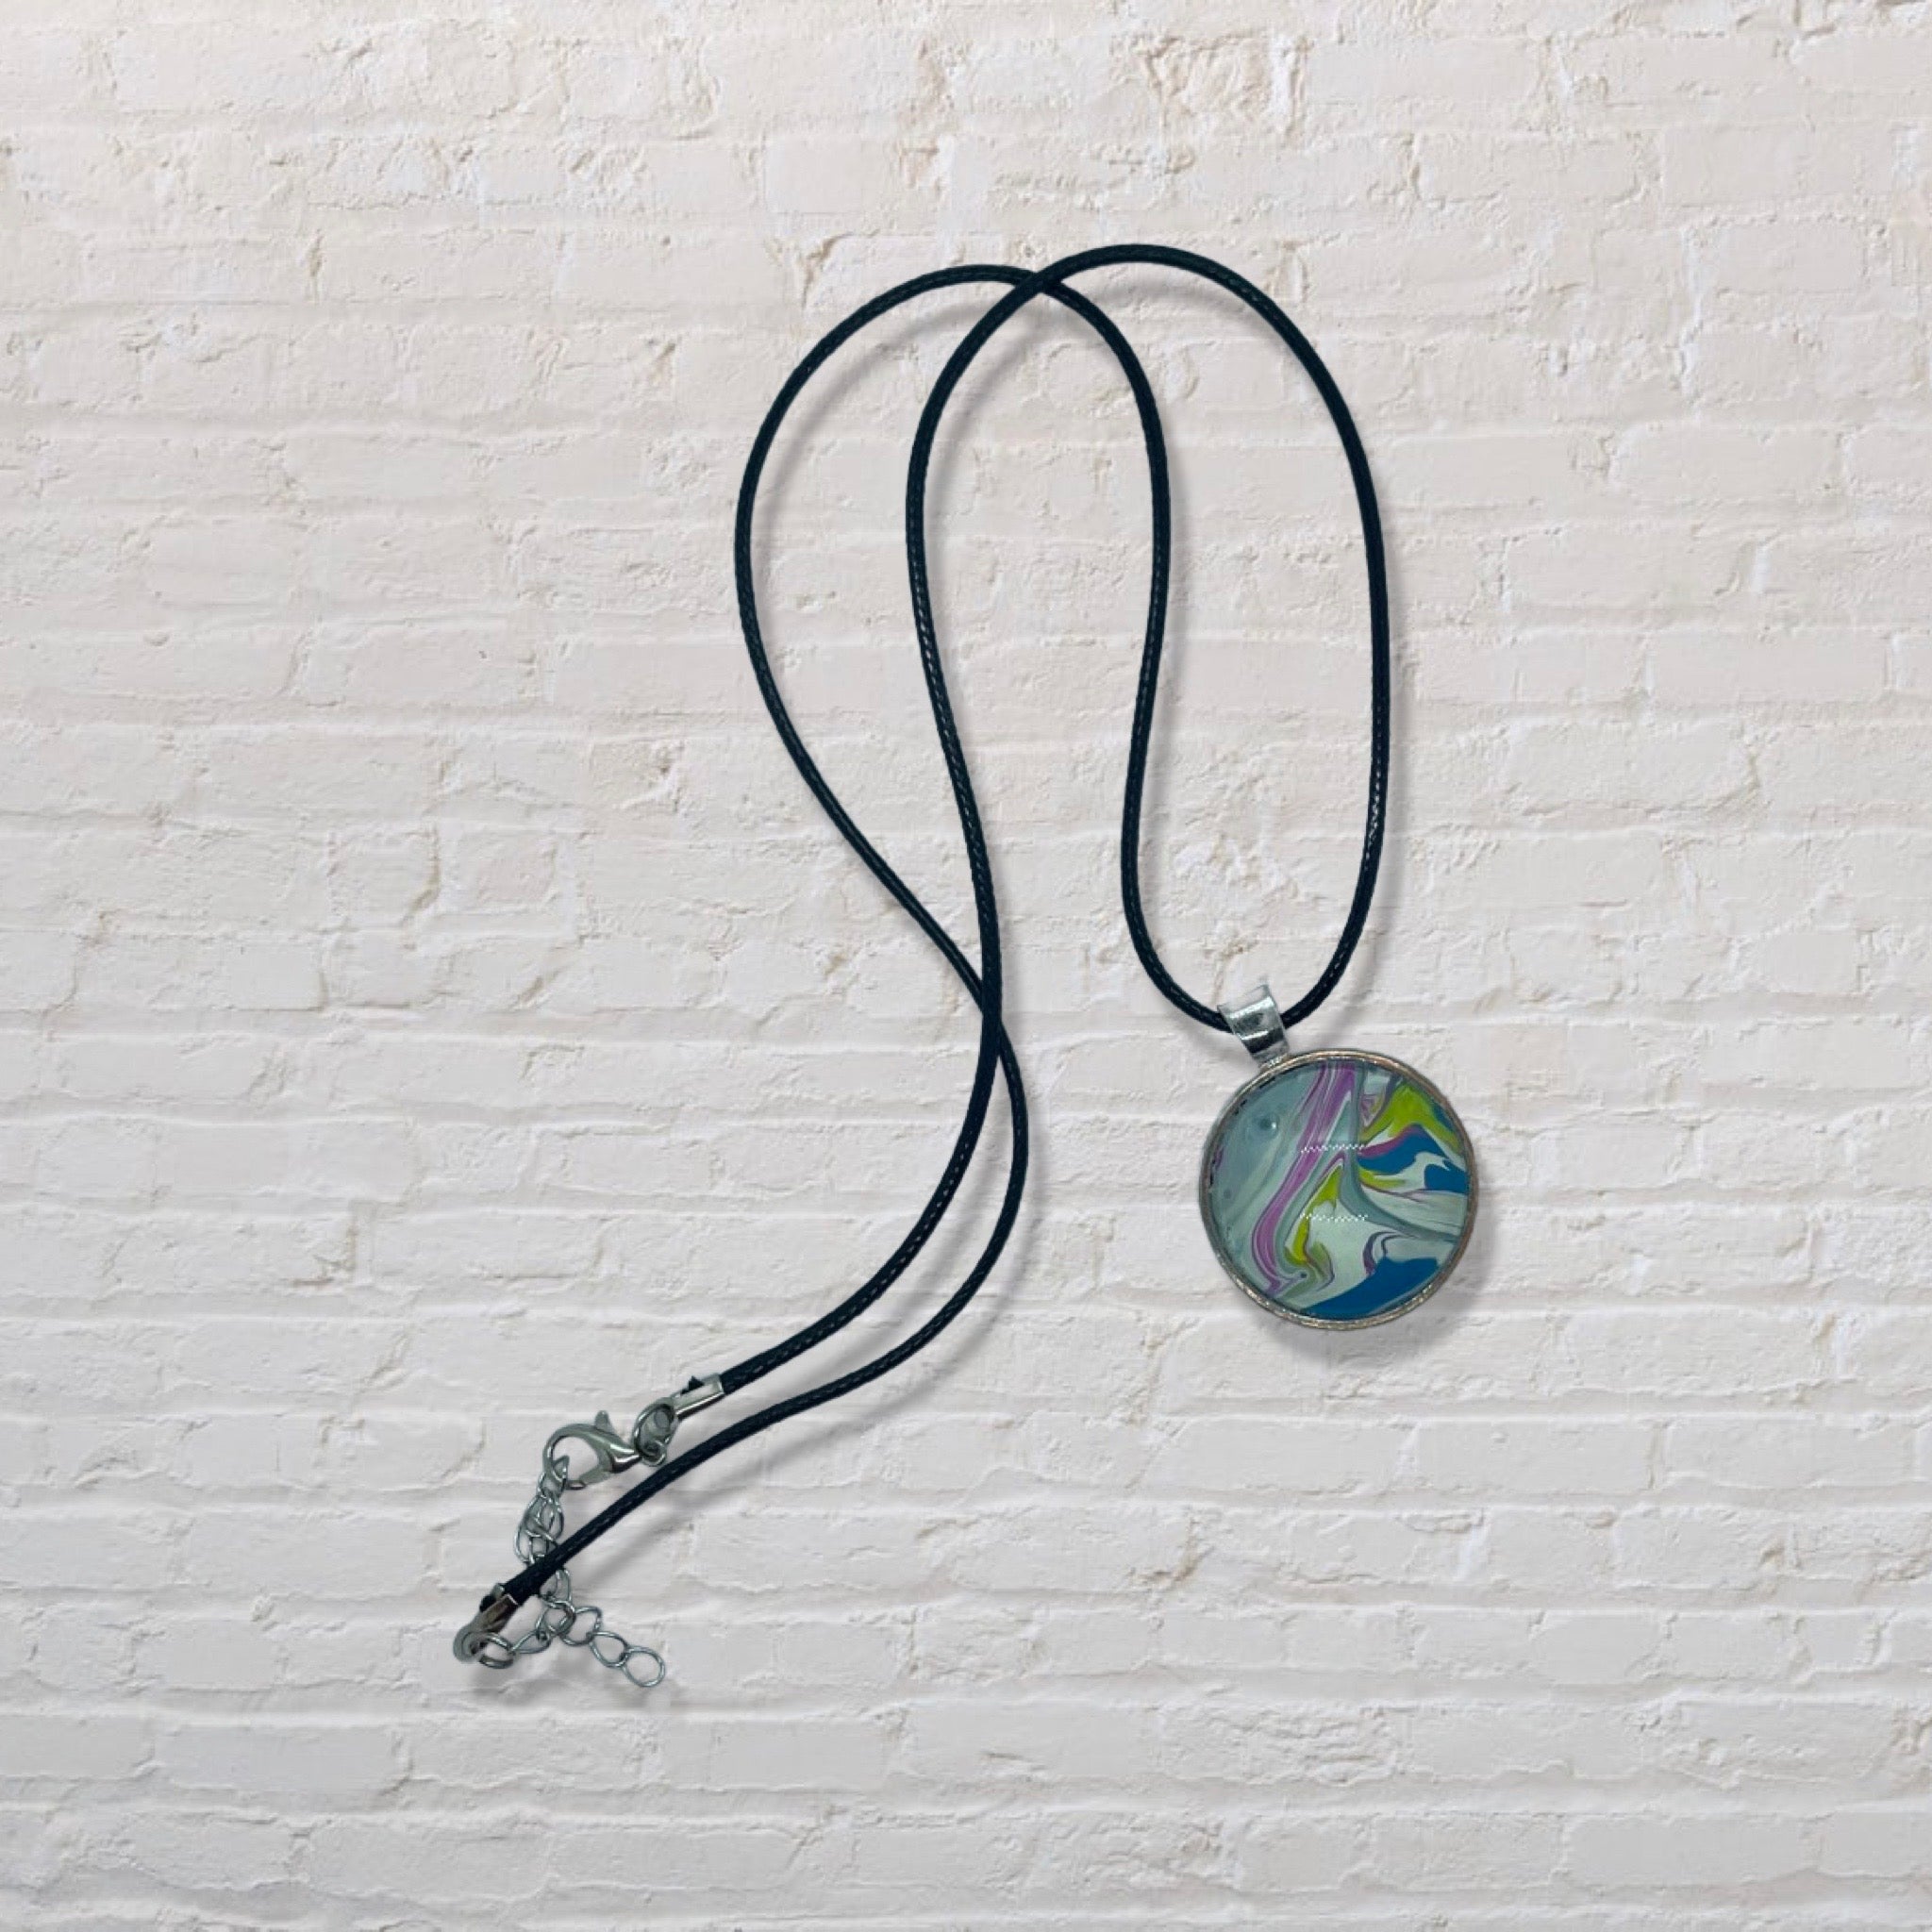 By The Kids -- Paint Pour Necklace - White, Blue, Pink and Yellow